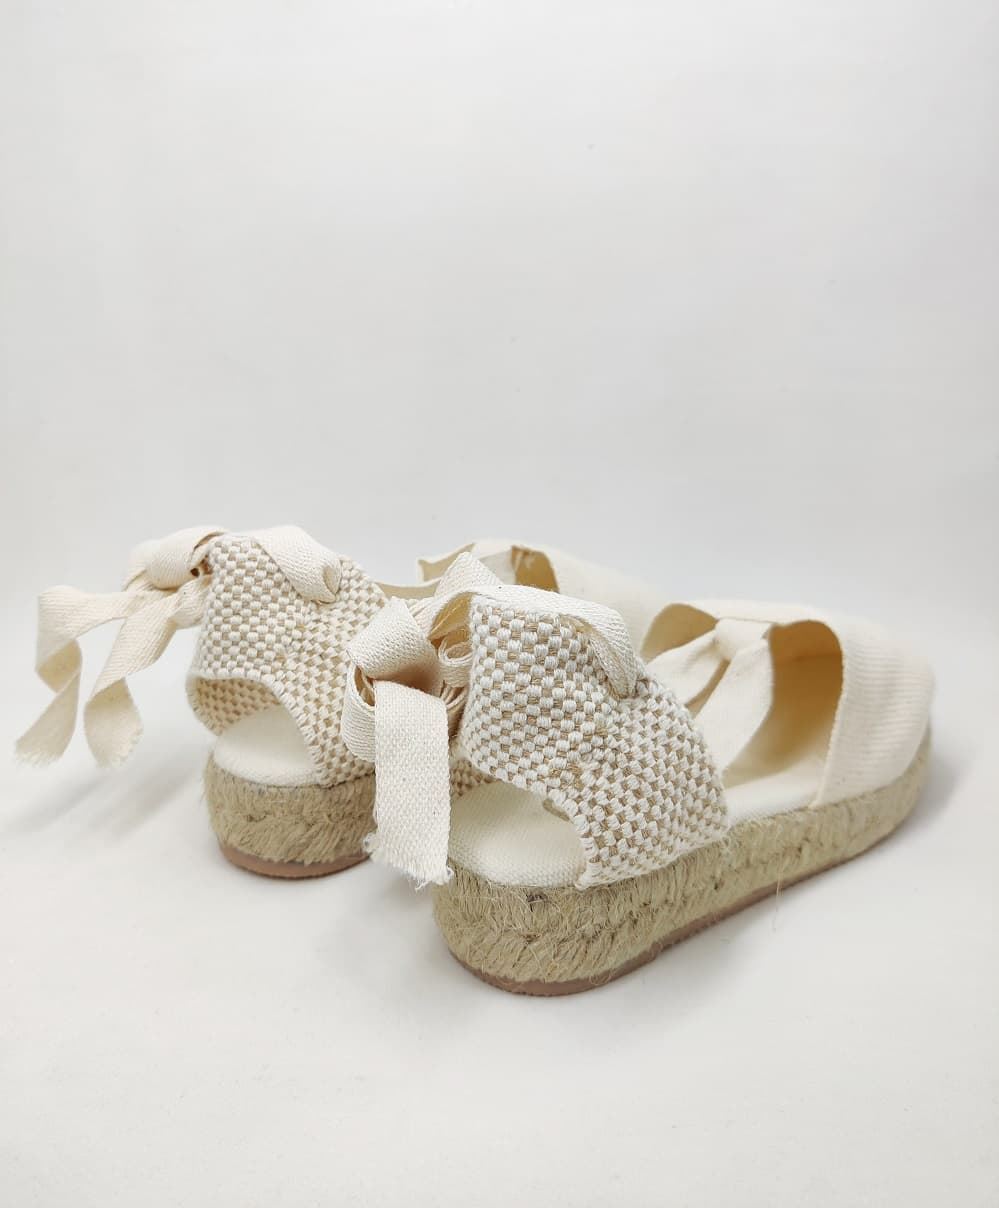 Beige wedge espadrilles with ribbons for girls and women - Image 3